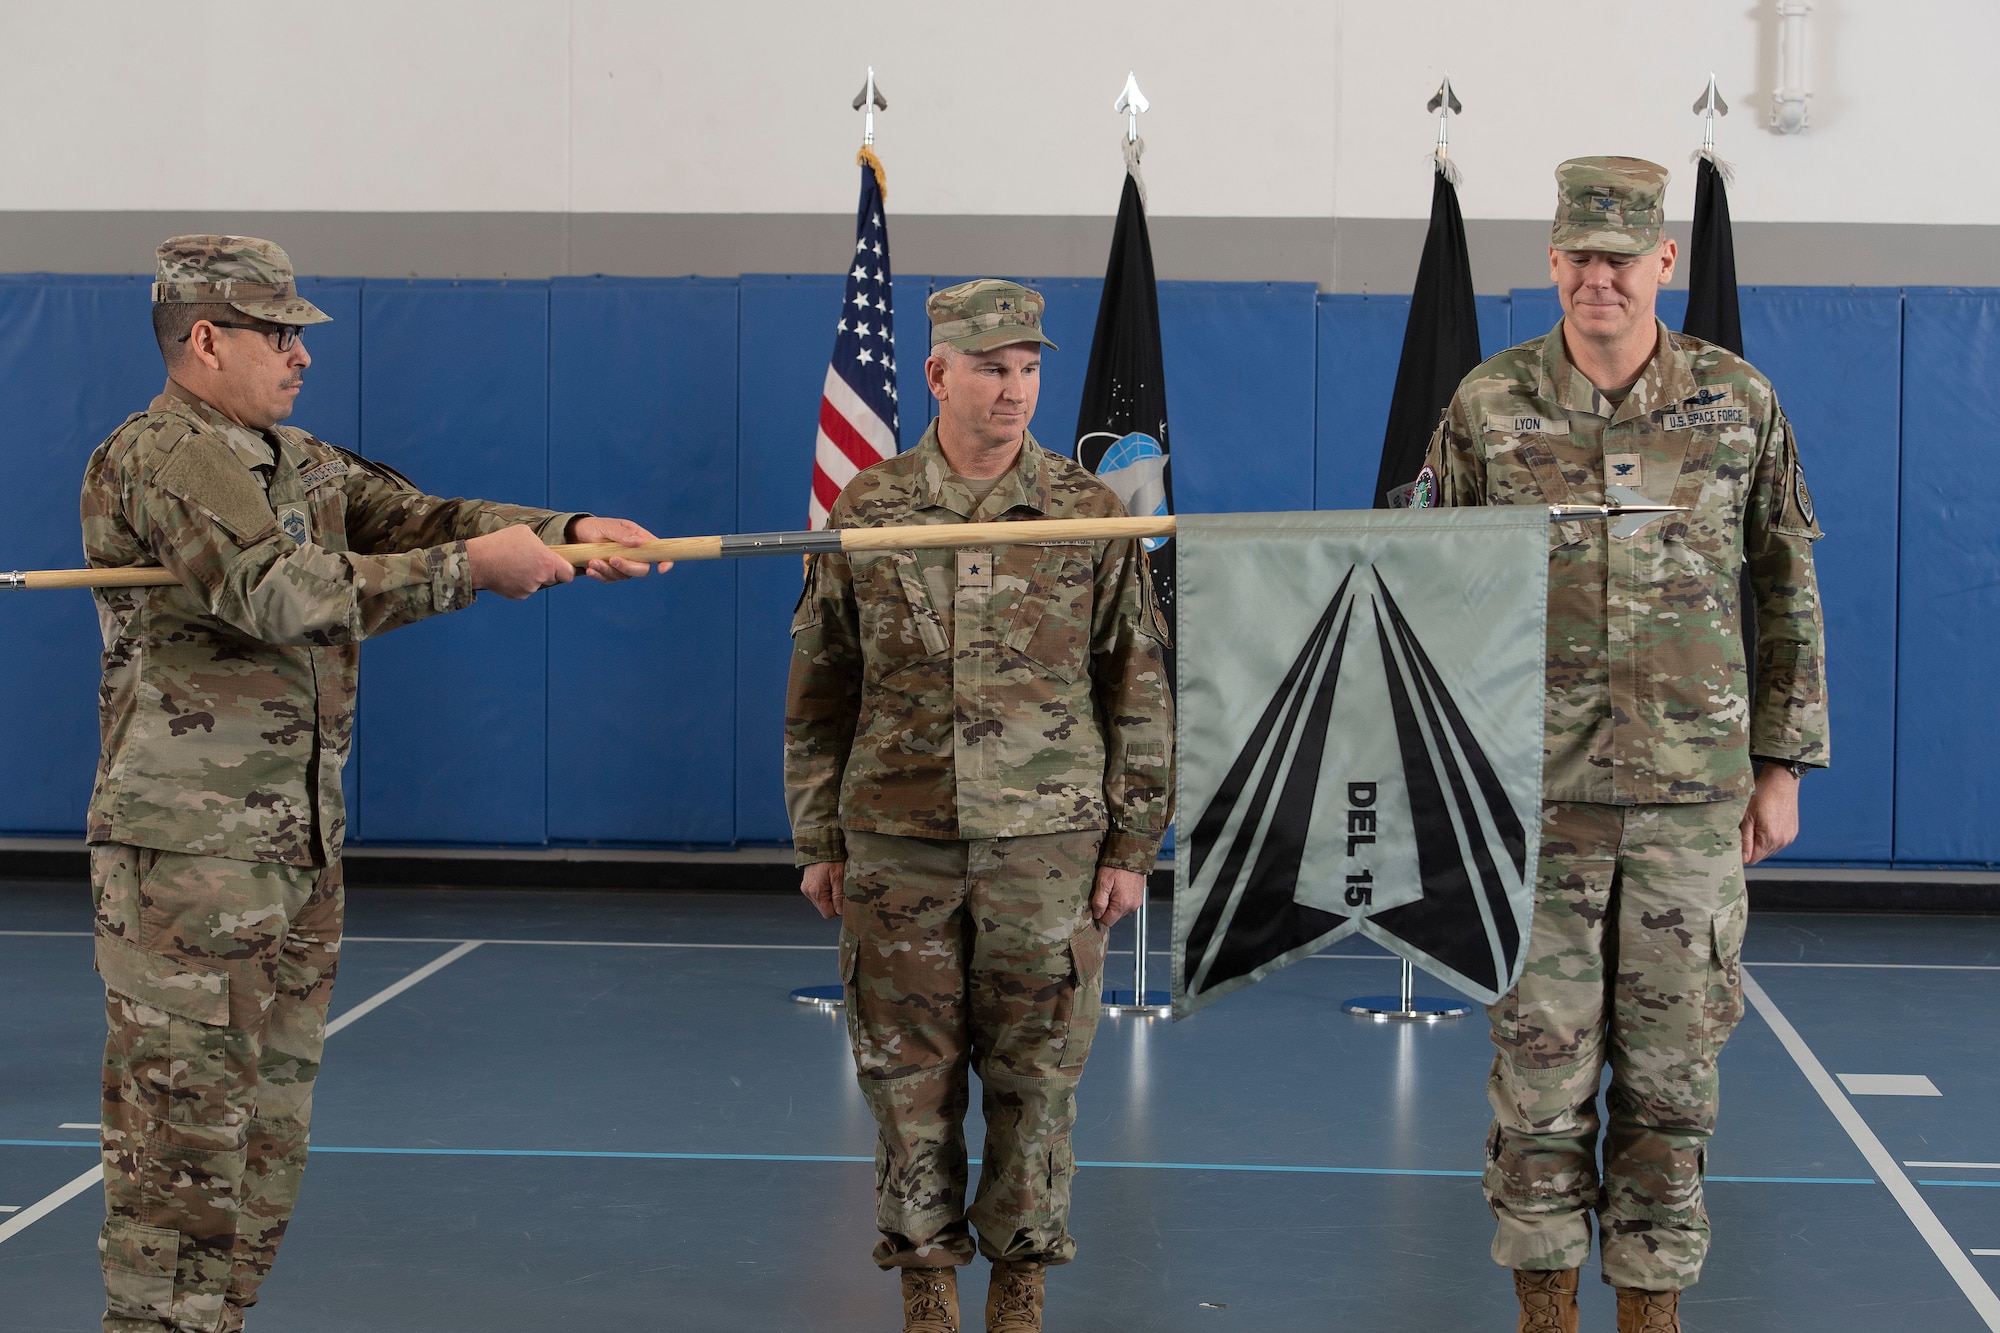 From left, U.S. Space Force Senior Master Sgt. Kristopher-Michael K. Kainoa, Space Delta 15 senior enlisted leader, unveils the DEL 15 guidon as U.S. Space Force Brig. Gen. Dennis Bythewood, Joint Task Force-Space Defense commander and U.S. Space Force Col. Stephen Lyon, DEL 15 commander, stand at attention during the DEL 15 activation ceremony at Schriever Space Force Base, Colorado, March 10, 2023. The mission of DEL 15 is to provide service command-and-control (C2) capability, mission ready crew forces, skills training, certifications, intelligence, surveillance, and reconnaissance (ISR), and support and cyber mission defense, and special mission support to the JTF-SD and its National Space Defense Center. (U.S. Space Force photo by Dennis Rogers)